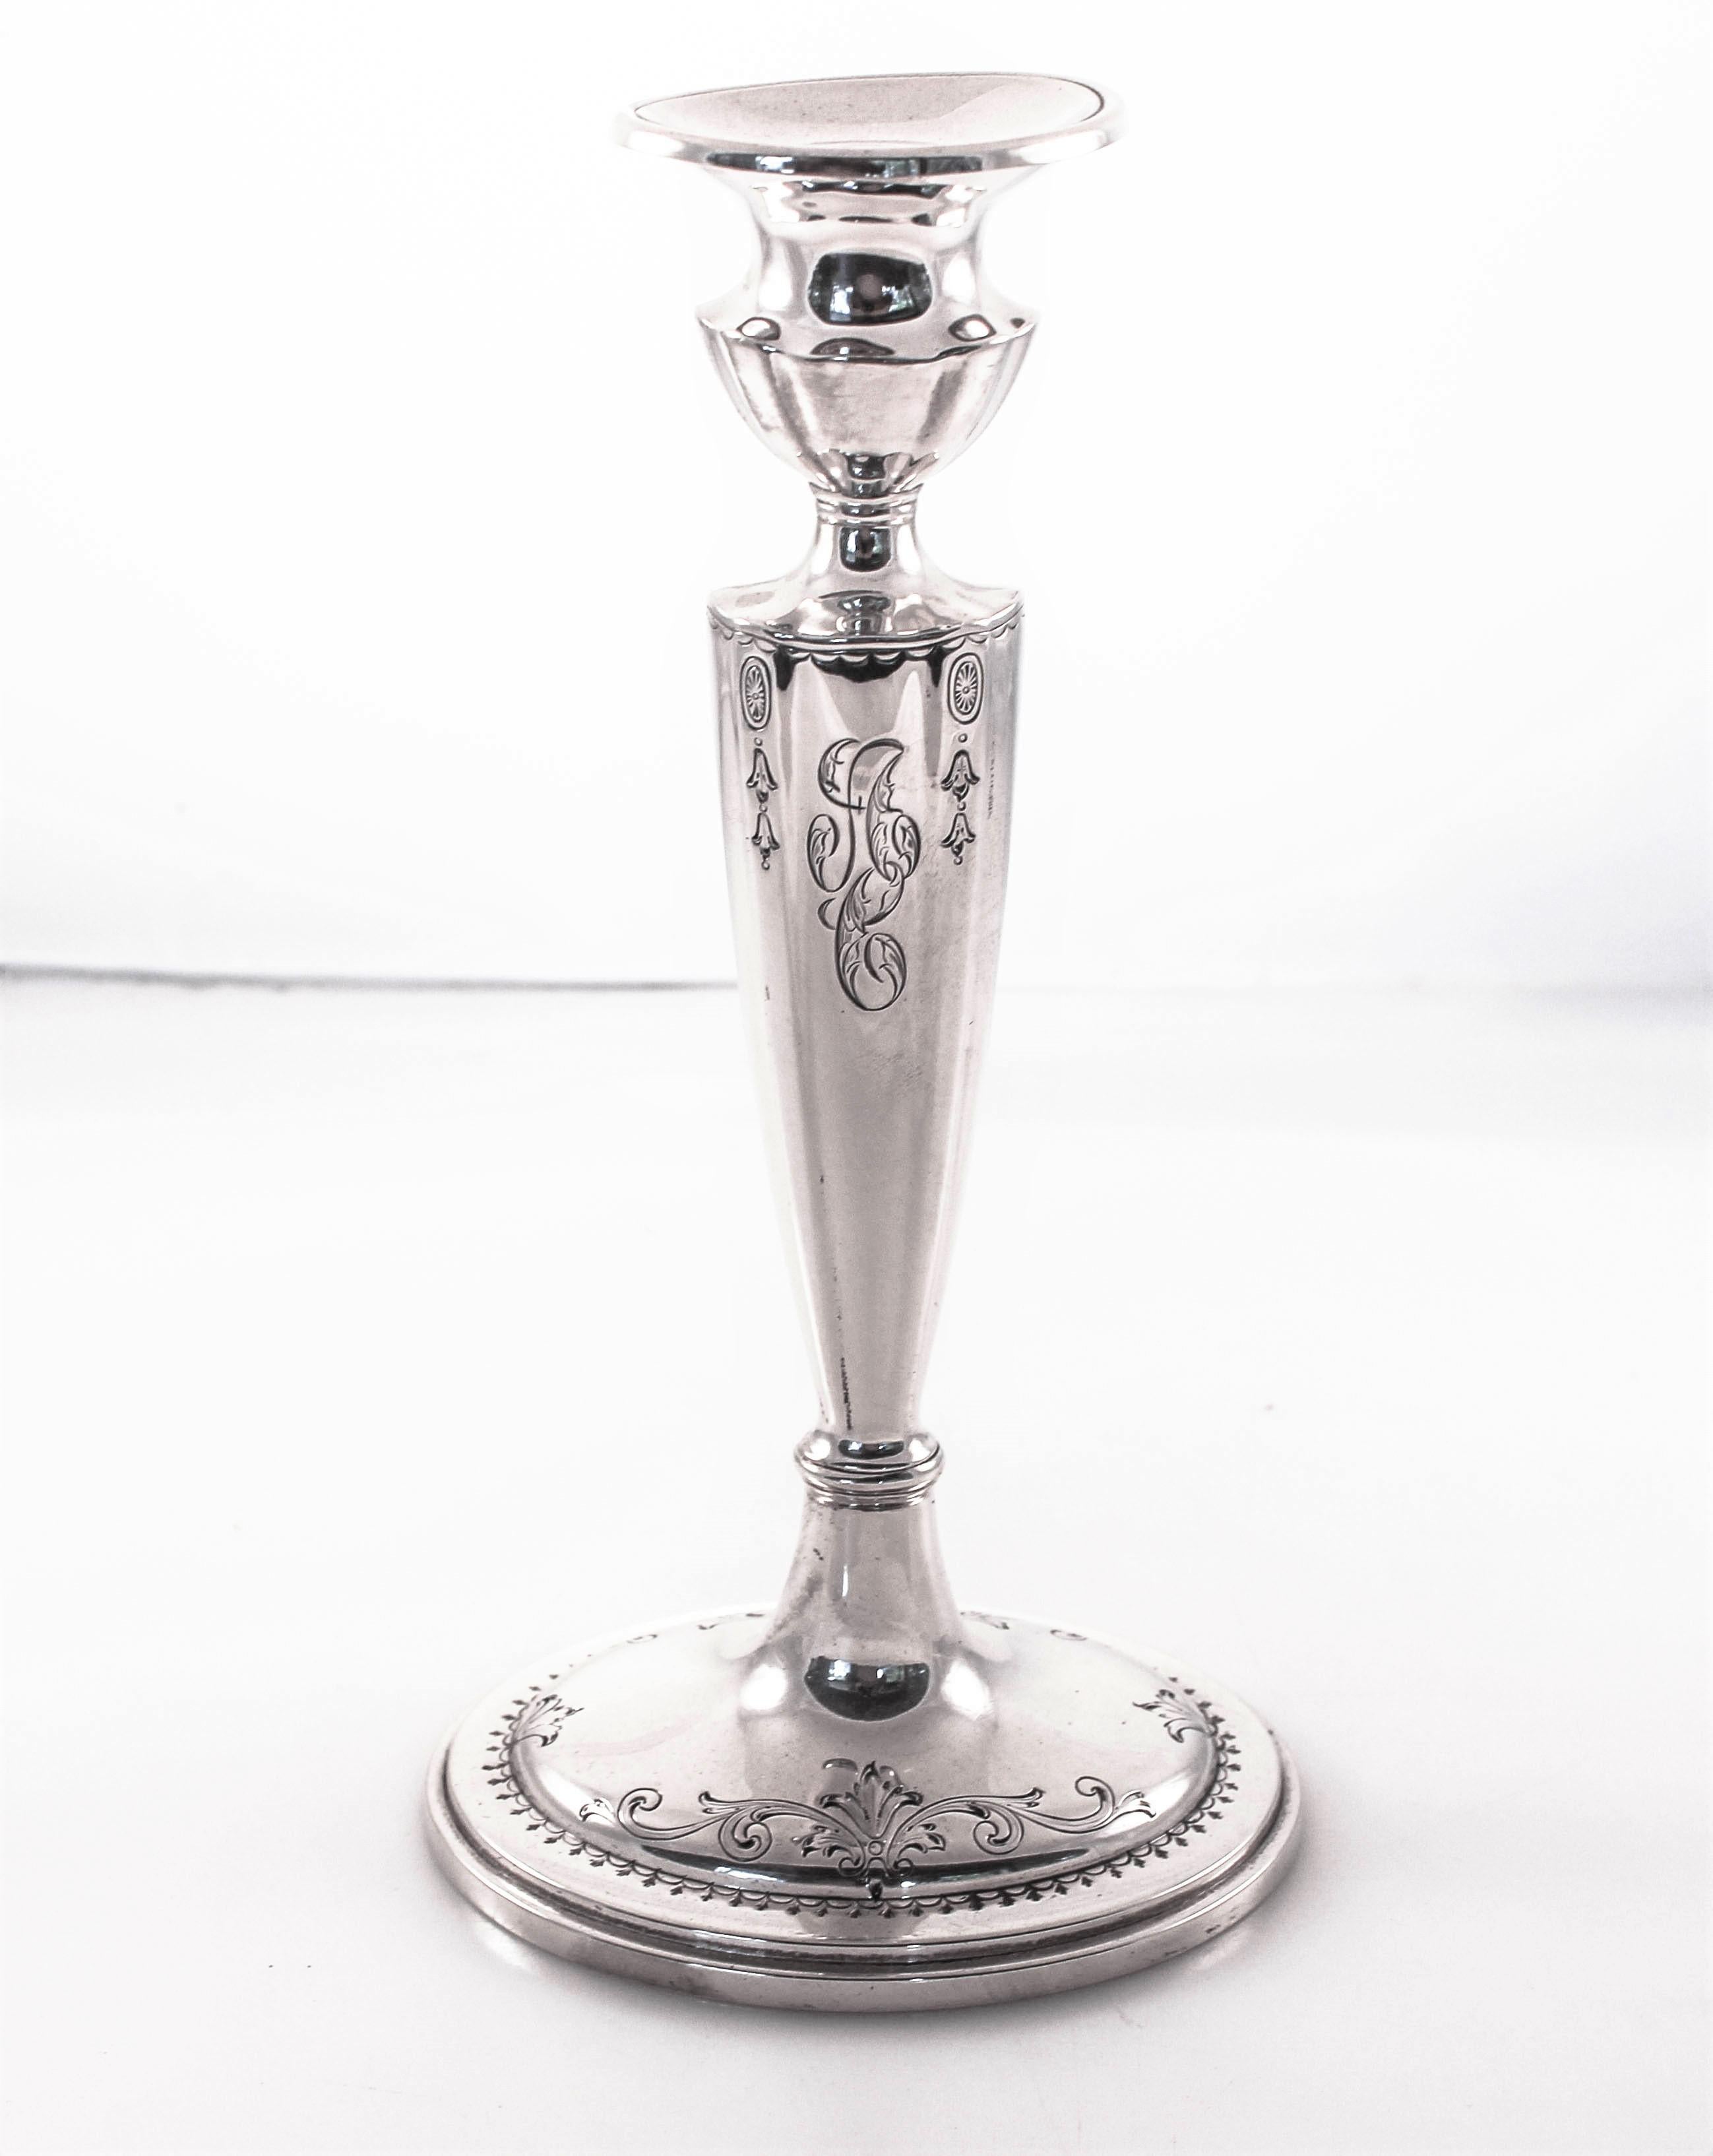 We are excited to offer this pair of sterling silver candlesticks dated 1915 by Gorham Silver Co, Providence Rhode Island. They have pretty etching around the base as well as top near the neck. They have an oval base and a tapered body. Gorham